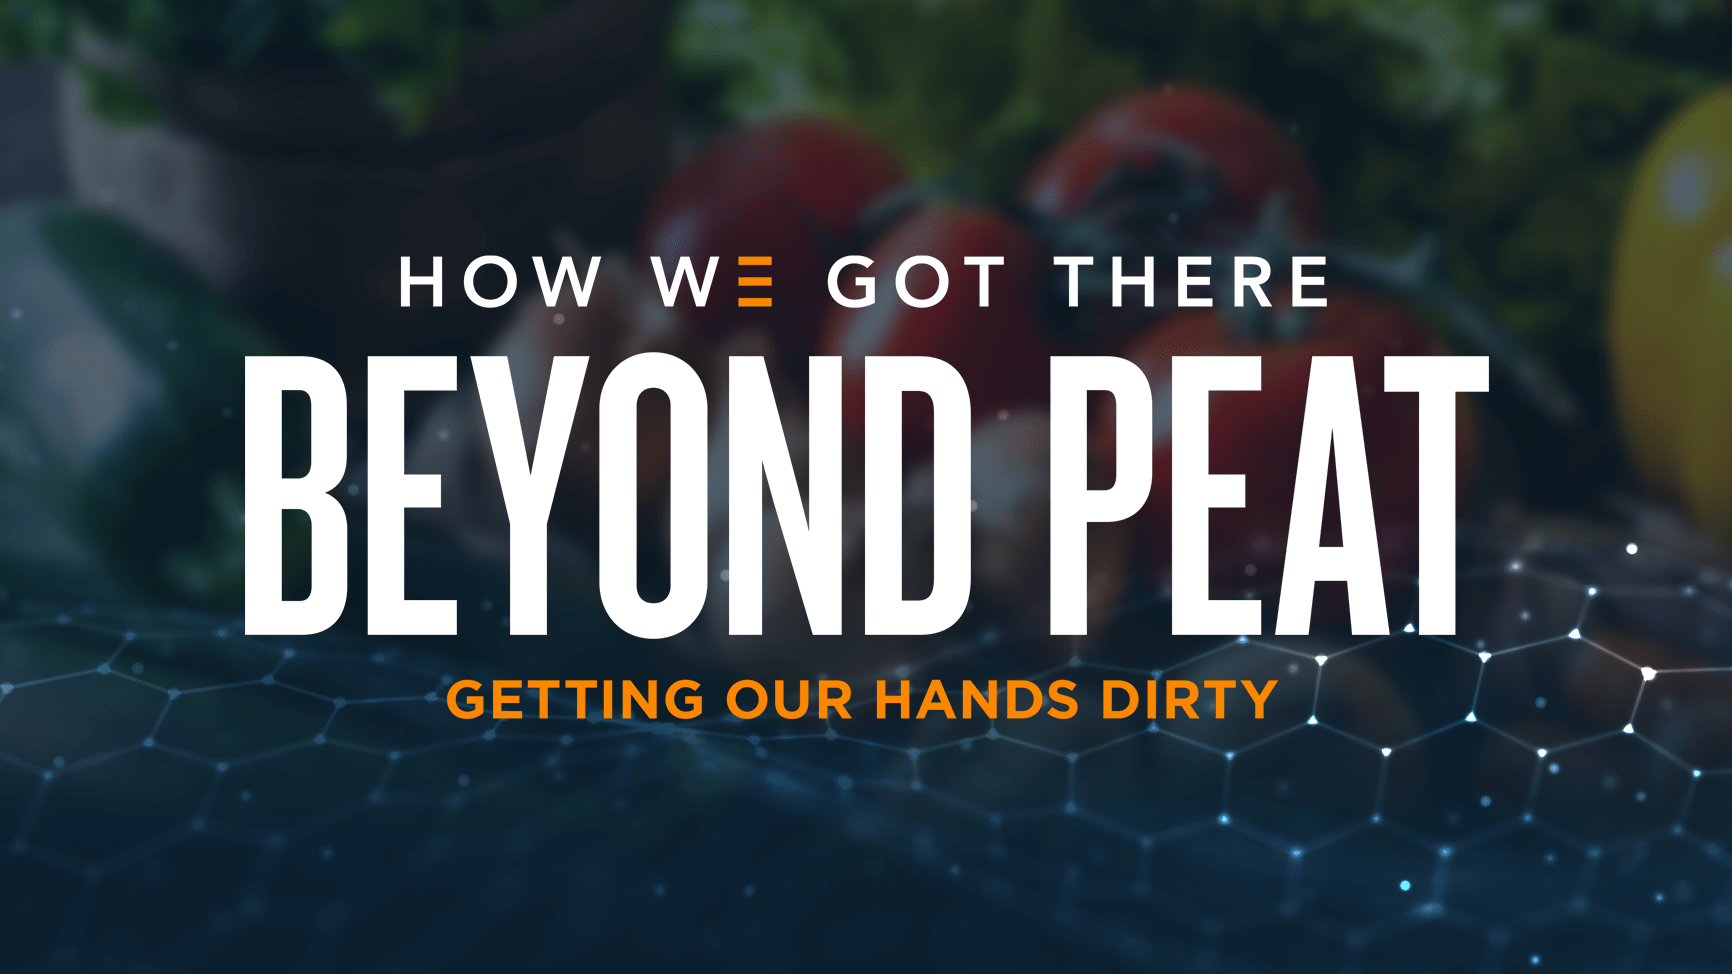 How We Got There | Beyond Peat | Getting Our Hands Dirty